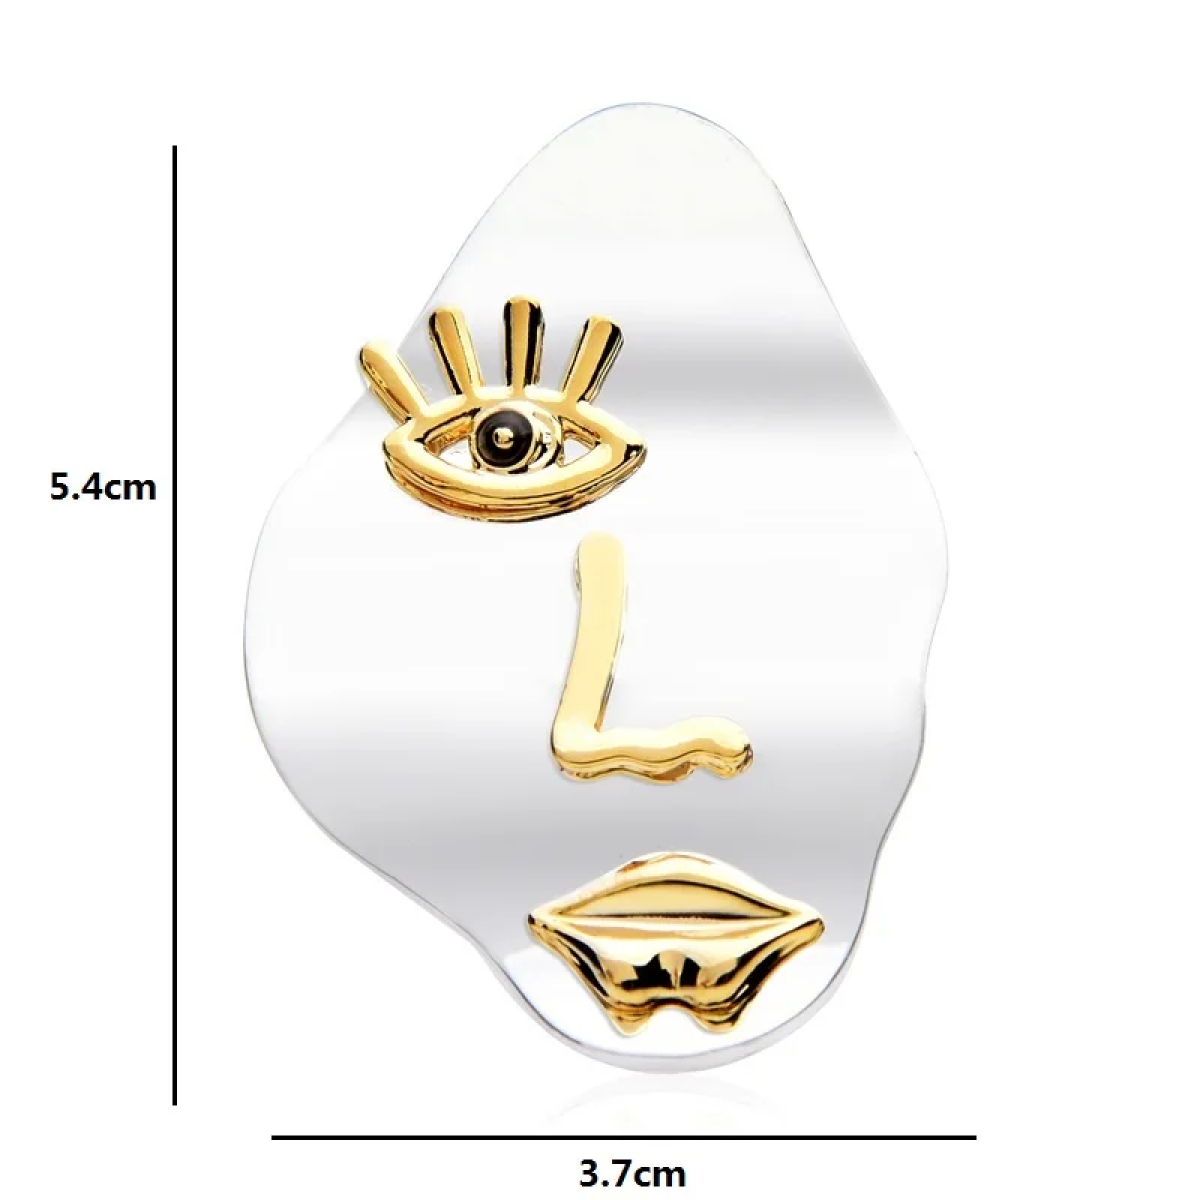 Dimensions: Chrome and Gold Colored Abstract Face Lapel Pin